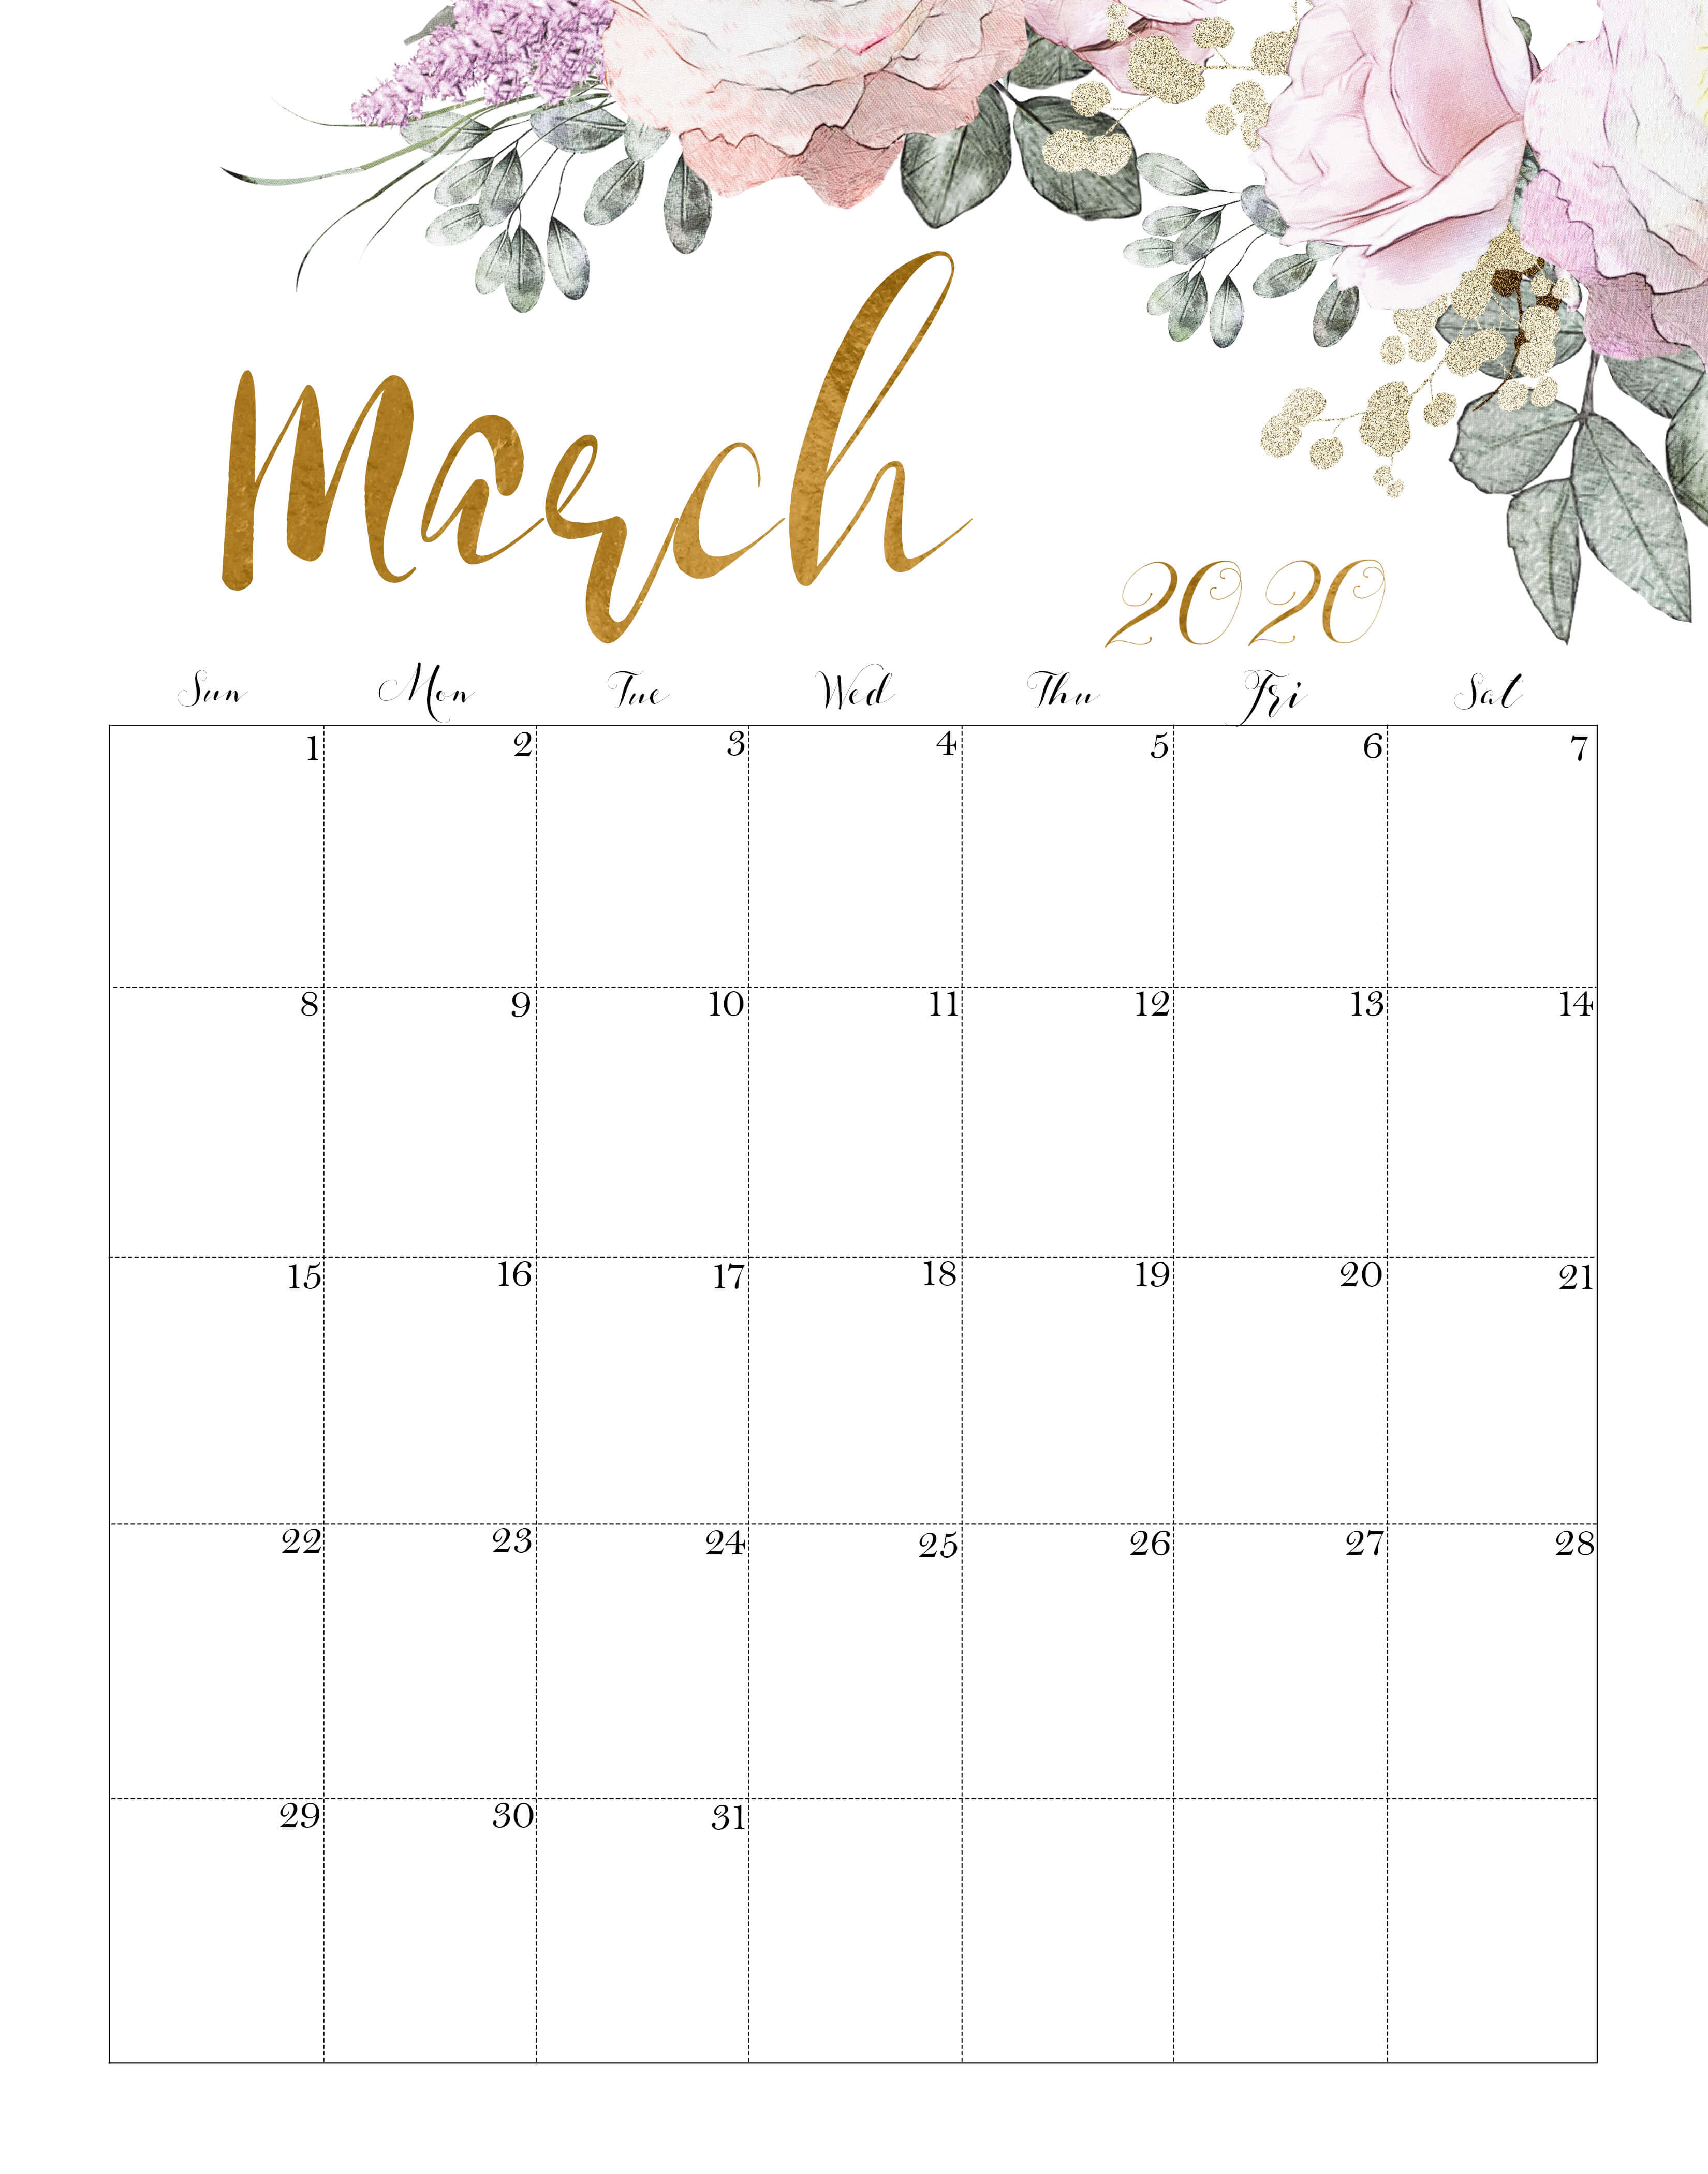 🔥 Download Floral March Calendar Printable Time Management Tools by